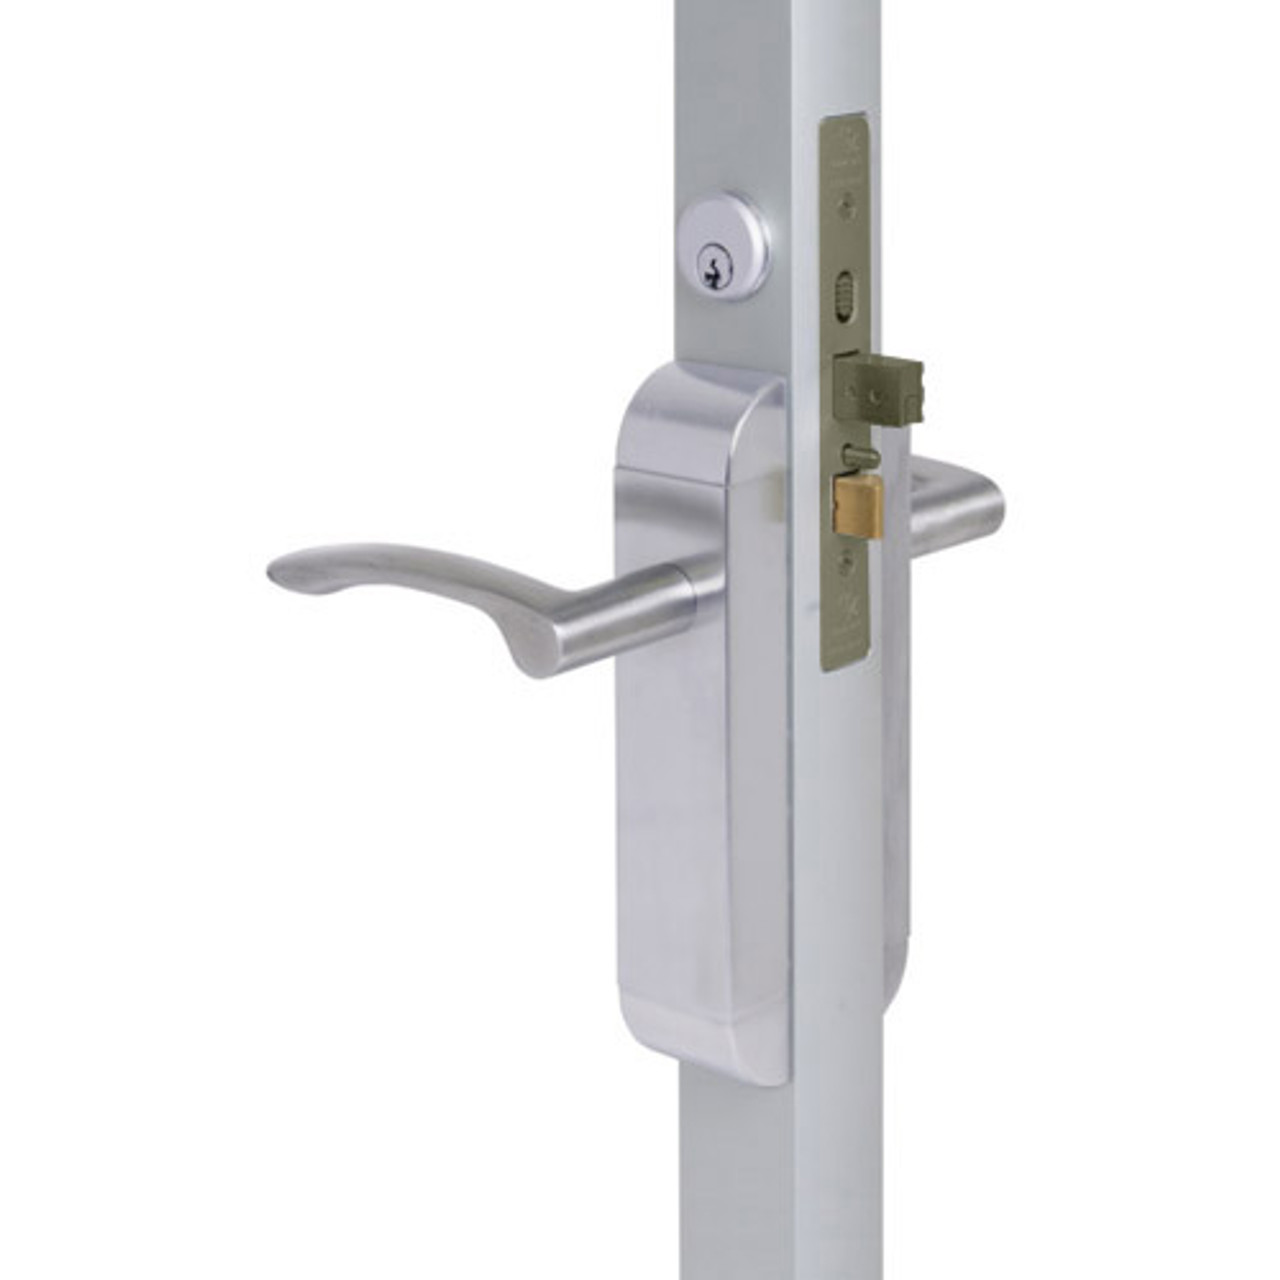 2190-312-301-32 Adams Rite Dual Force Interconnected 2190 series Deadlock/Deadlatch in Bright Stainless